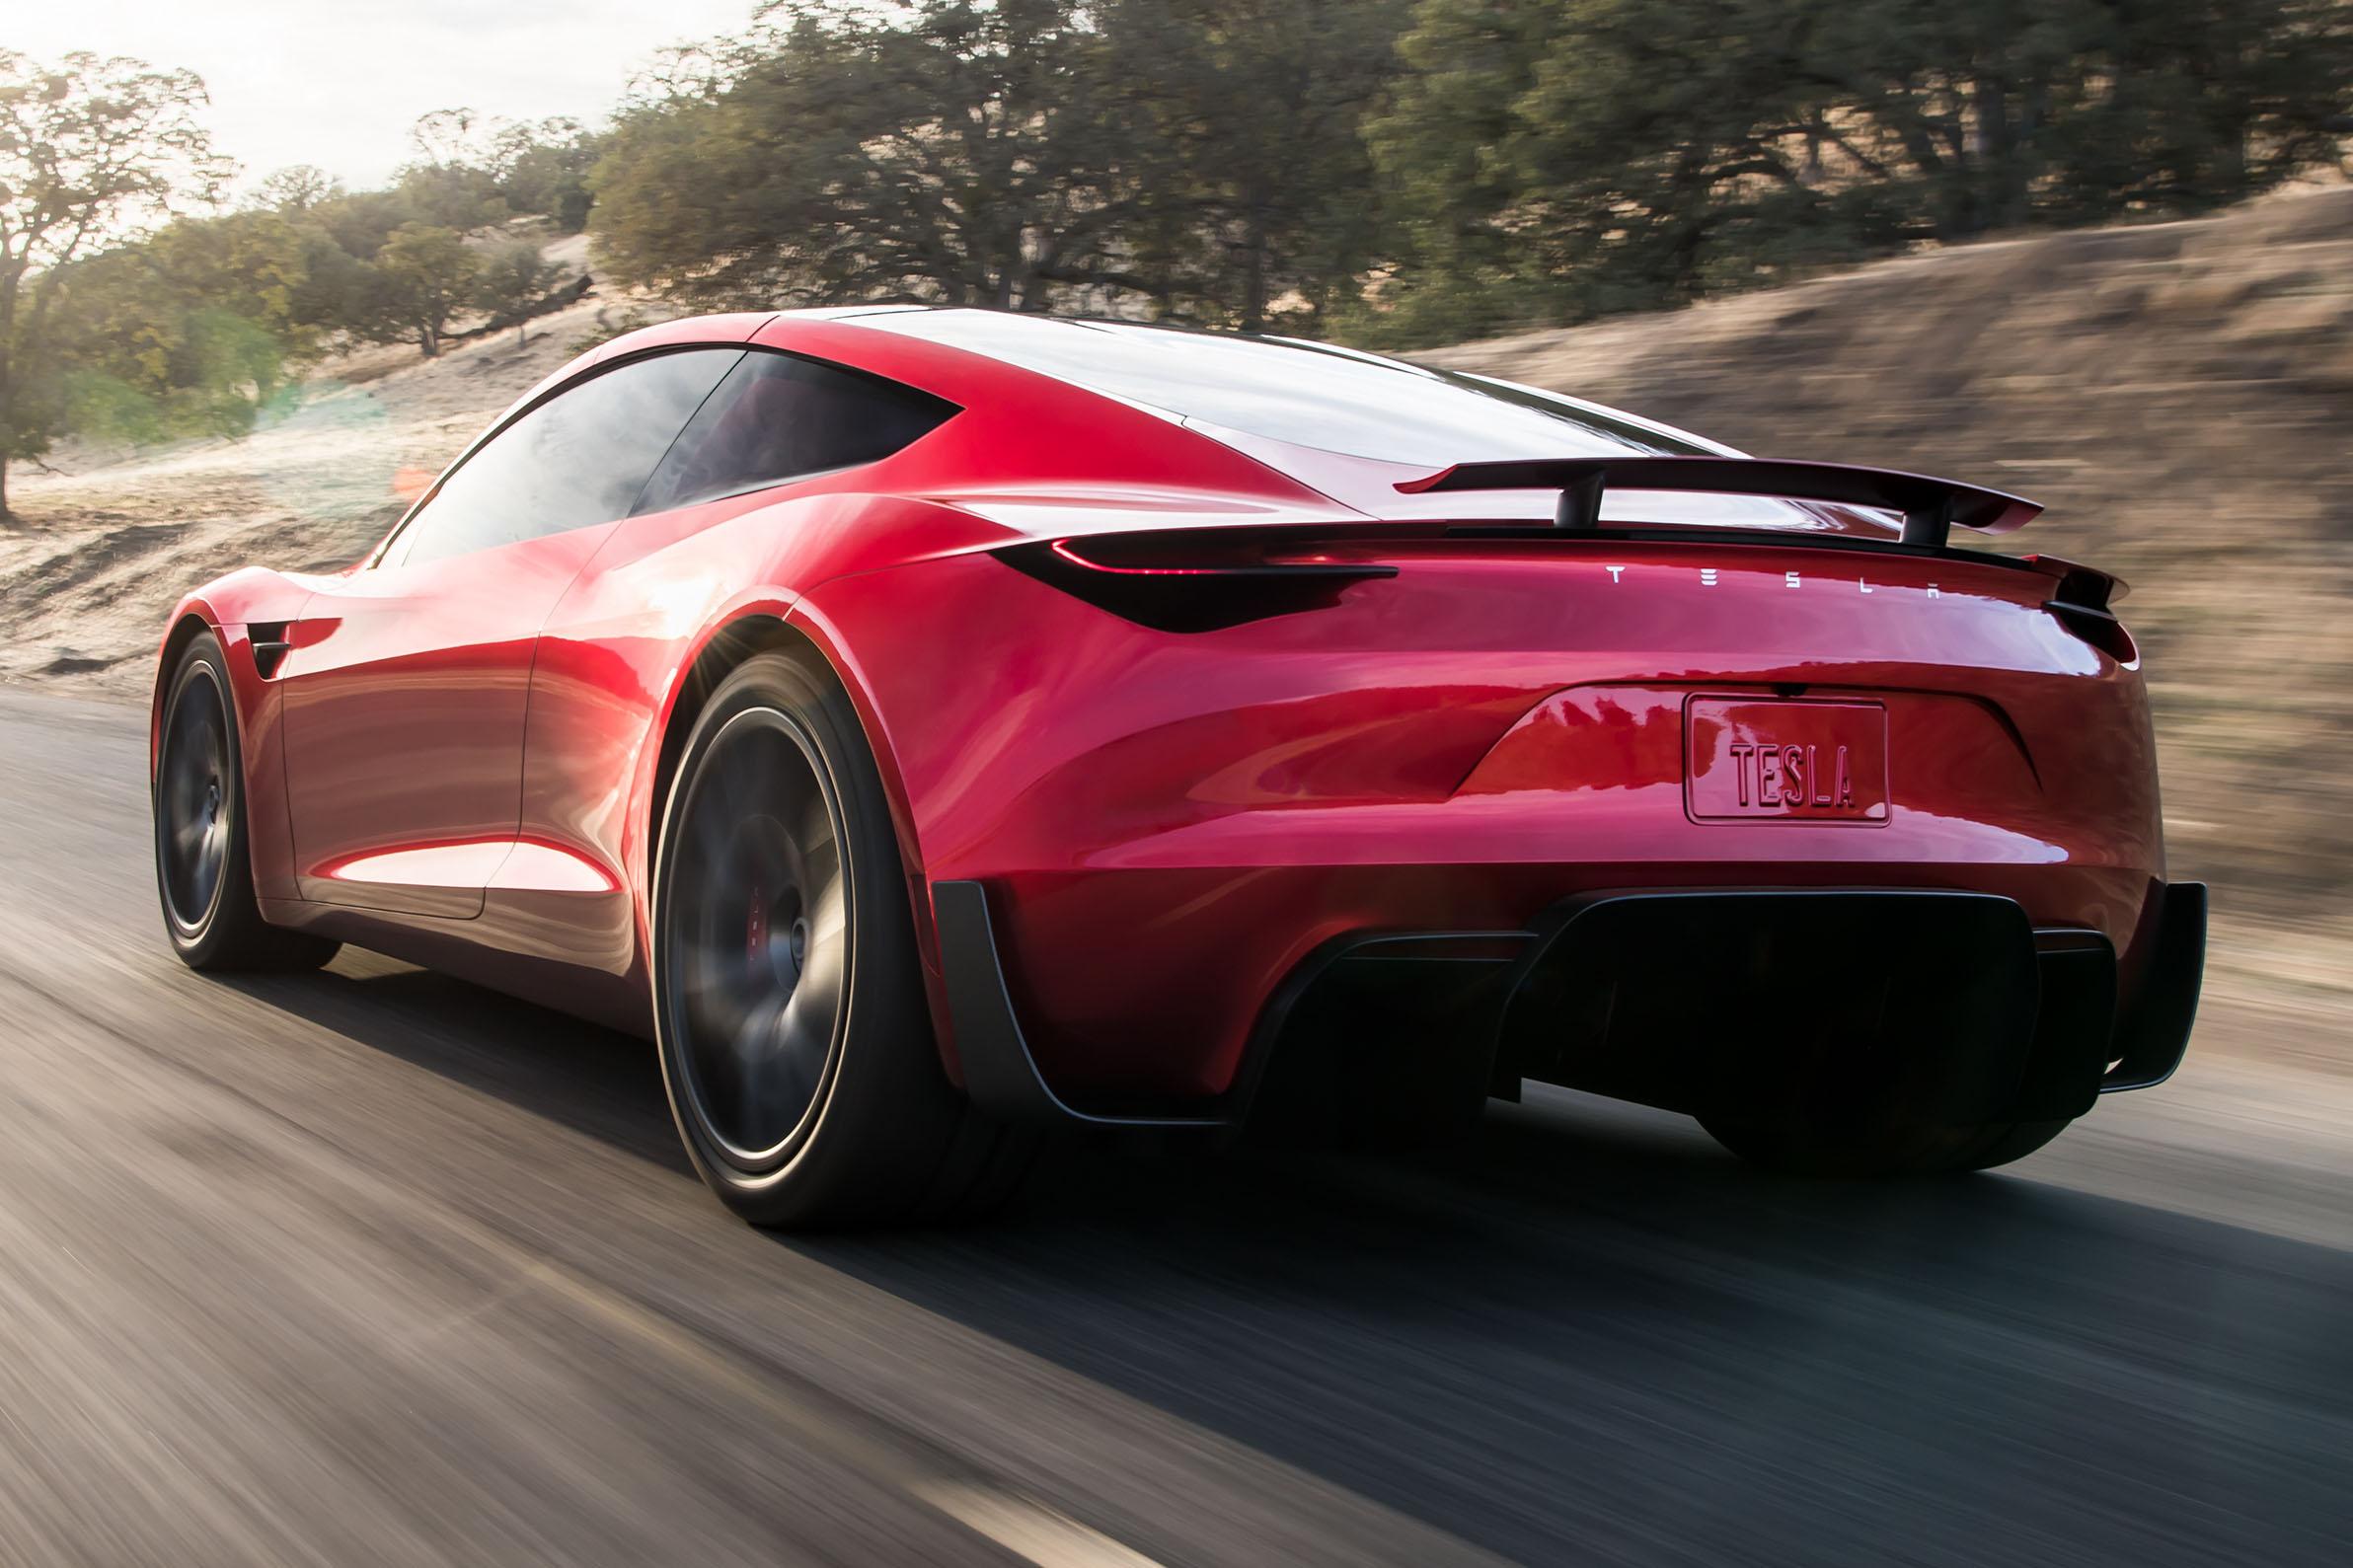 elon musk claims tesla roadster will have 0-60mph time under 1s